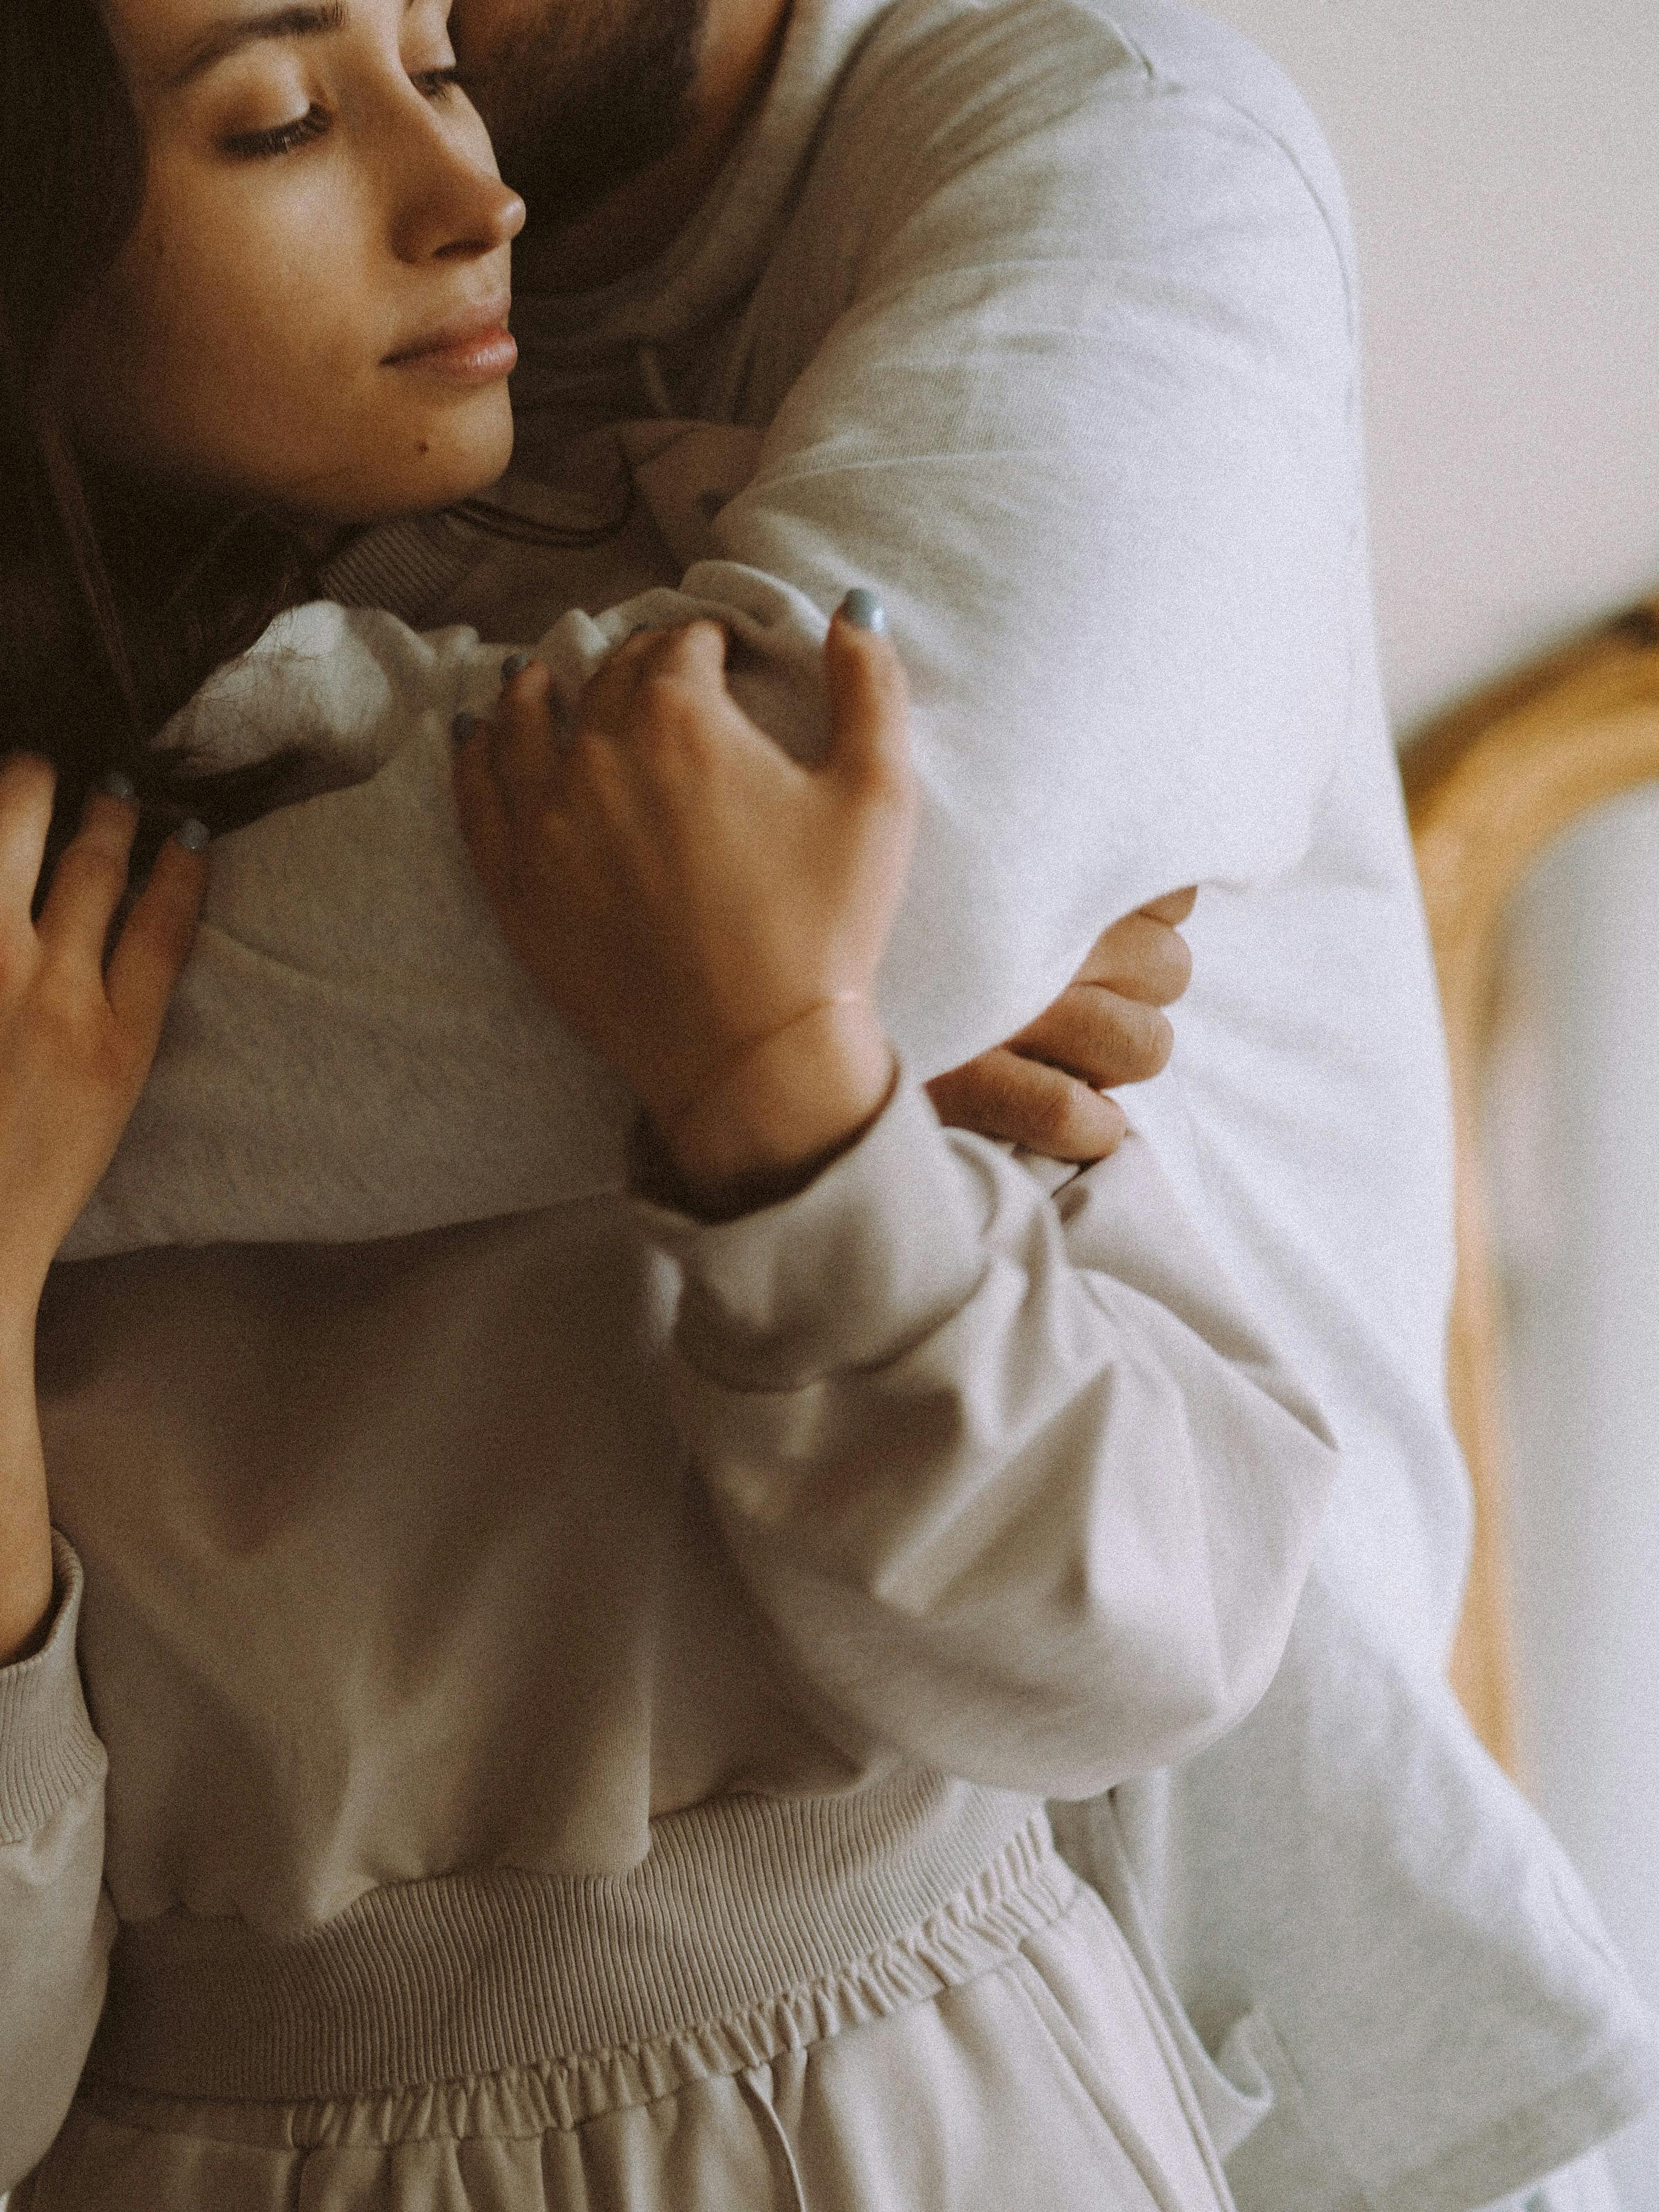 A couple embracing | Source: Pexels